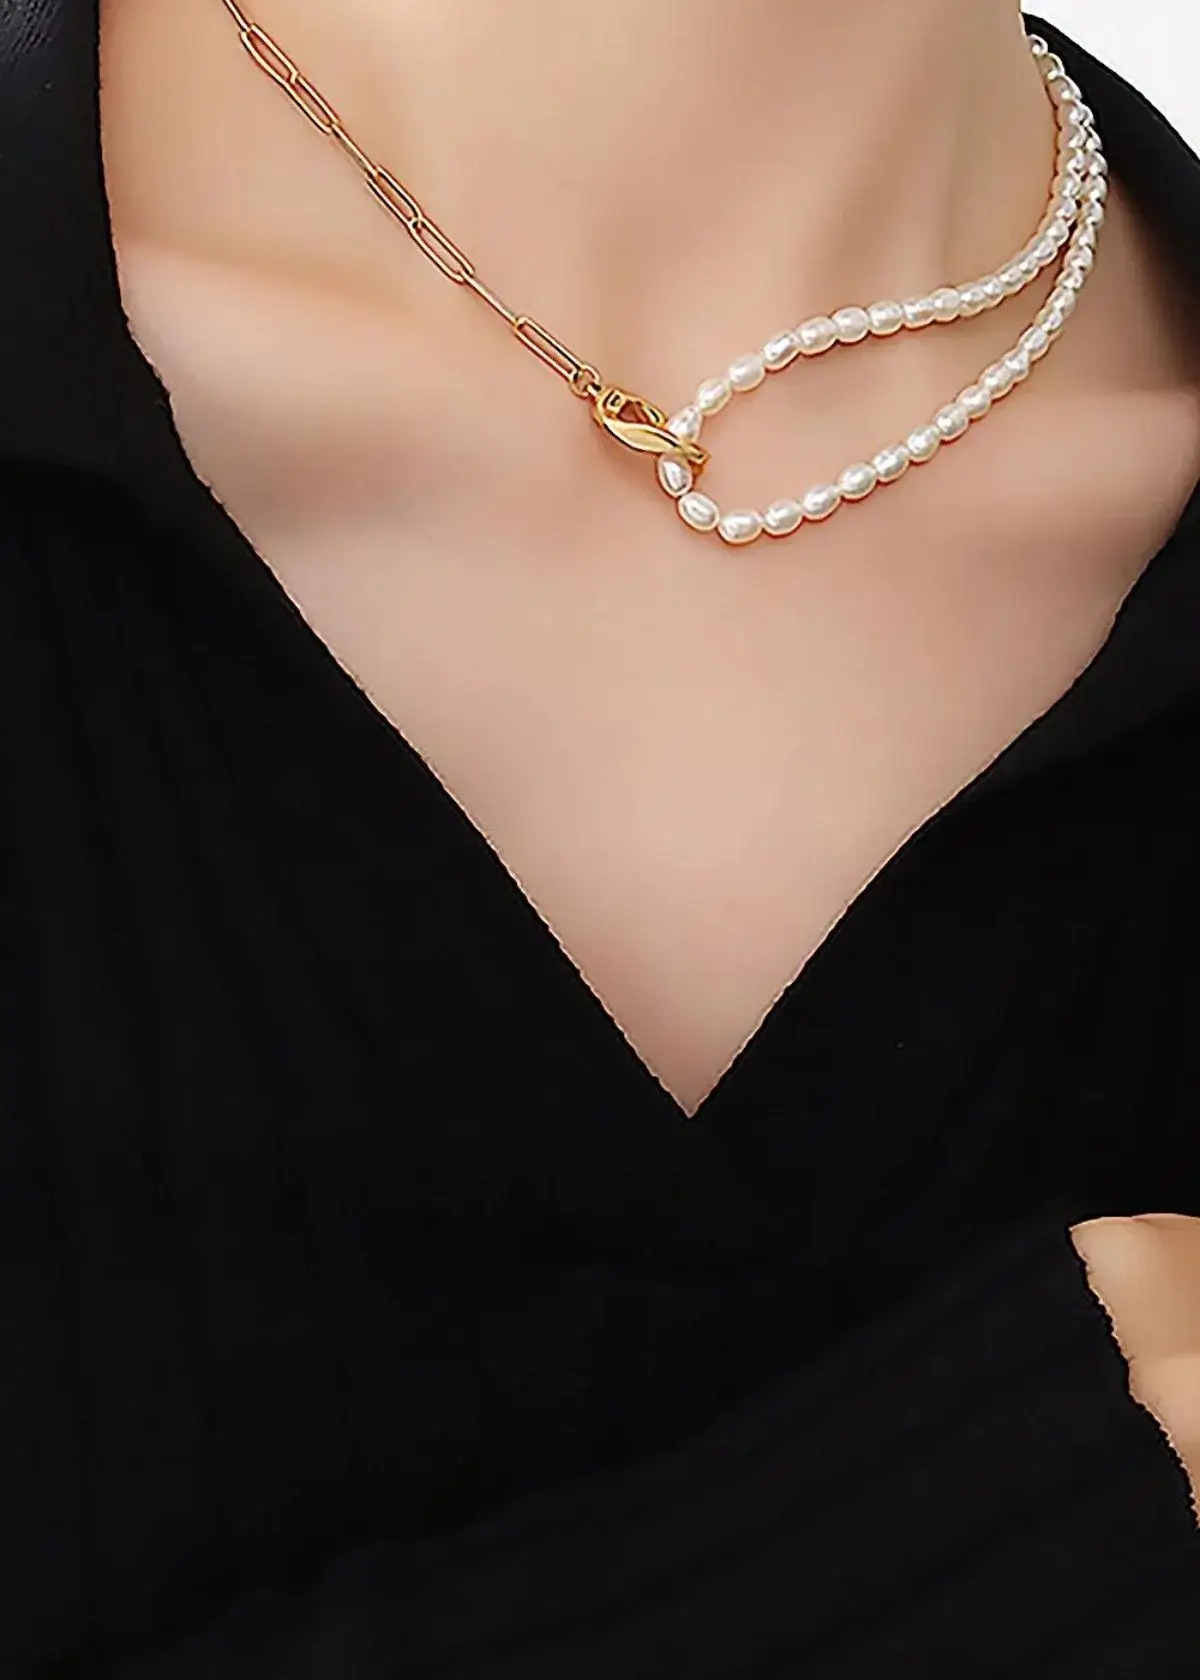 How can I Style a Half-pearl Half-chain Necklace?